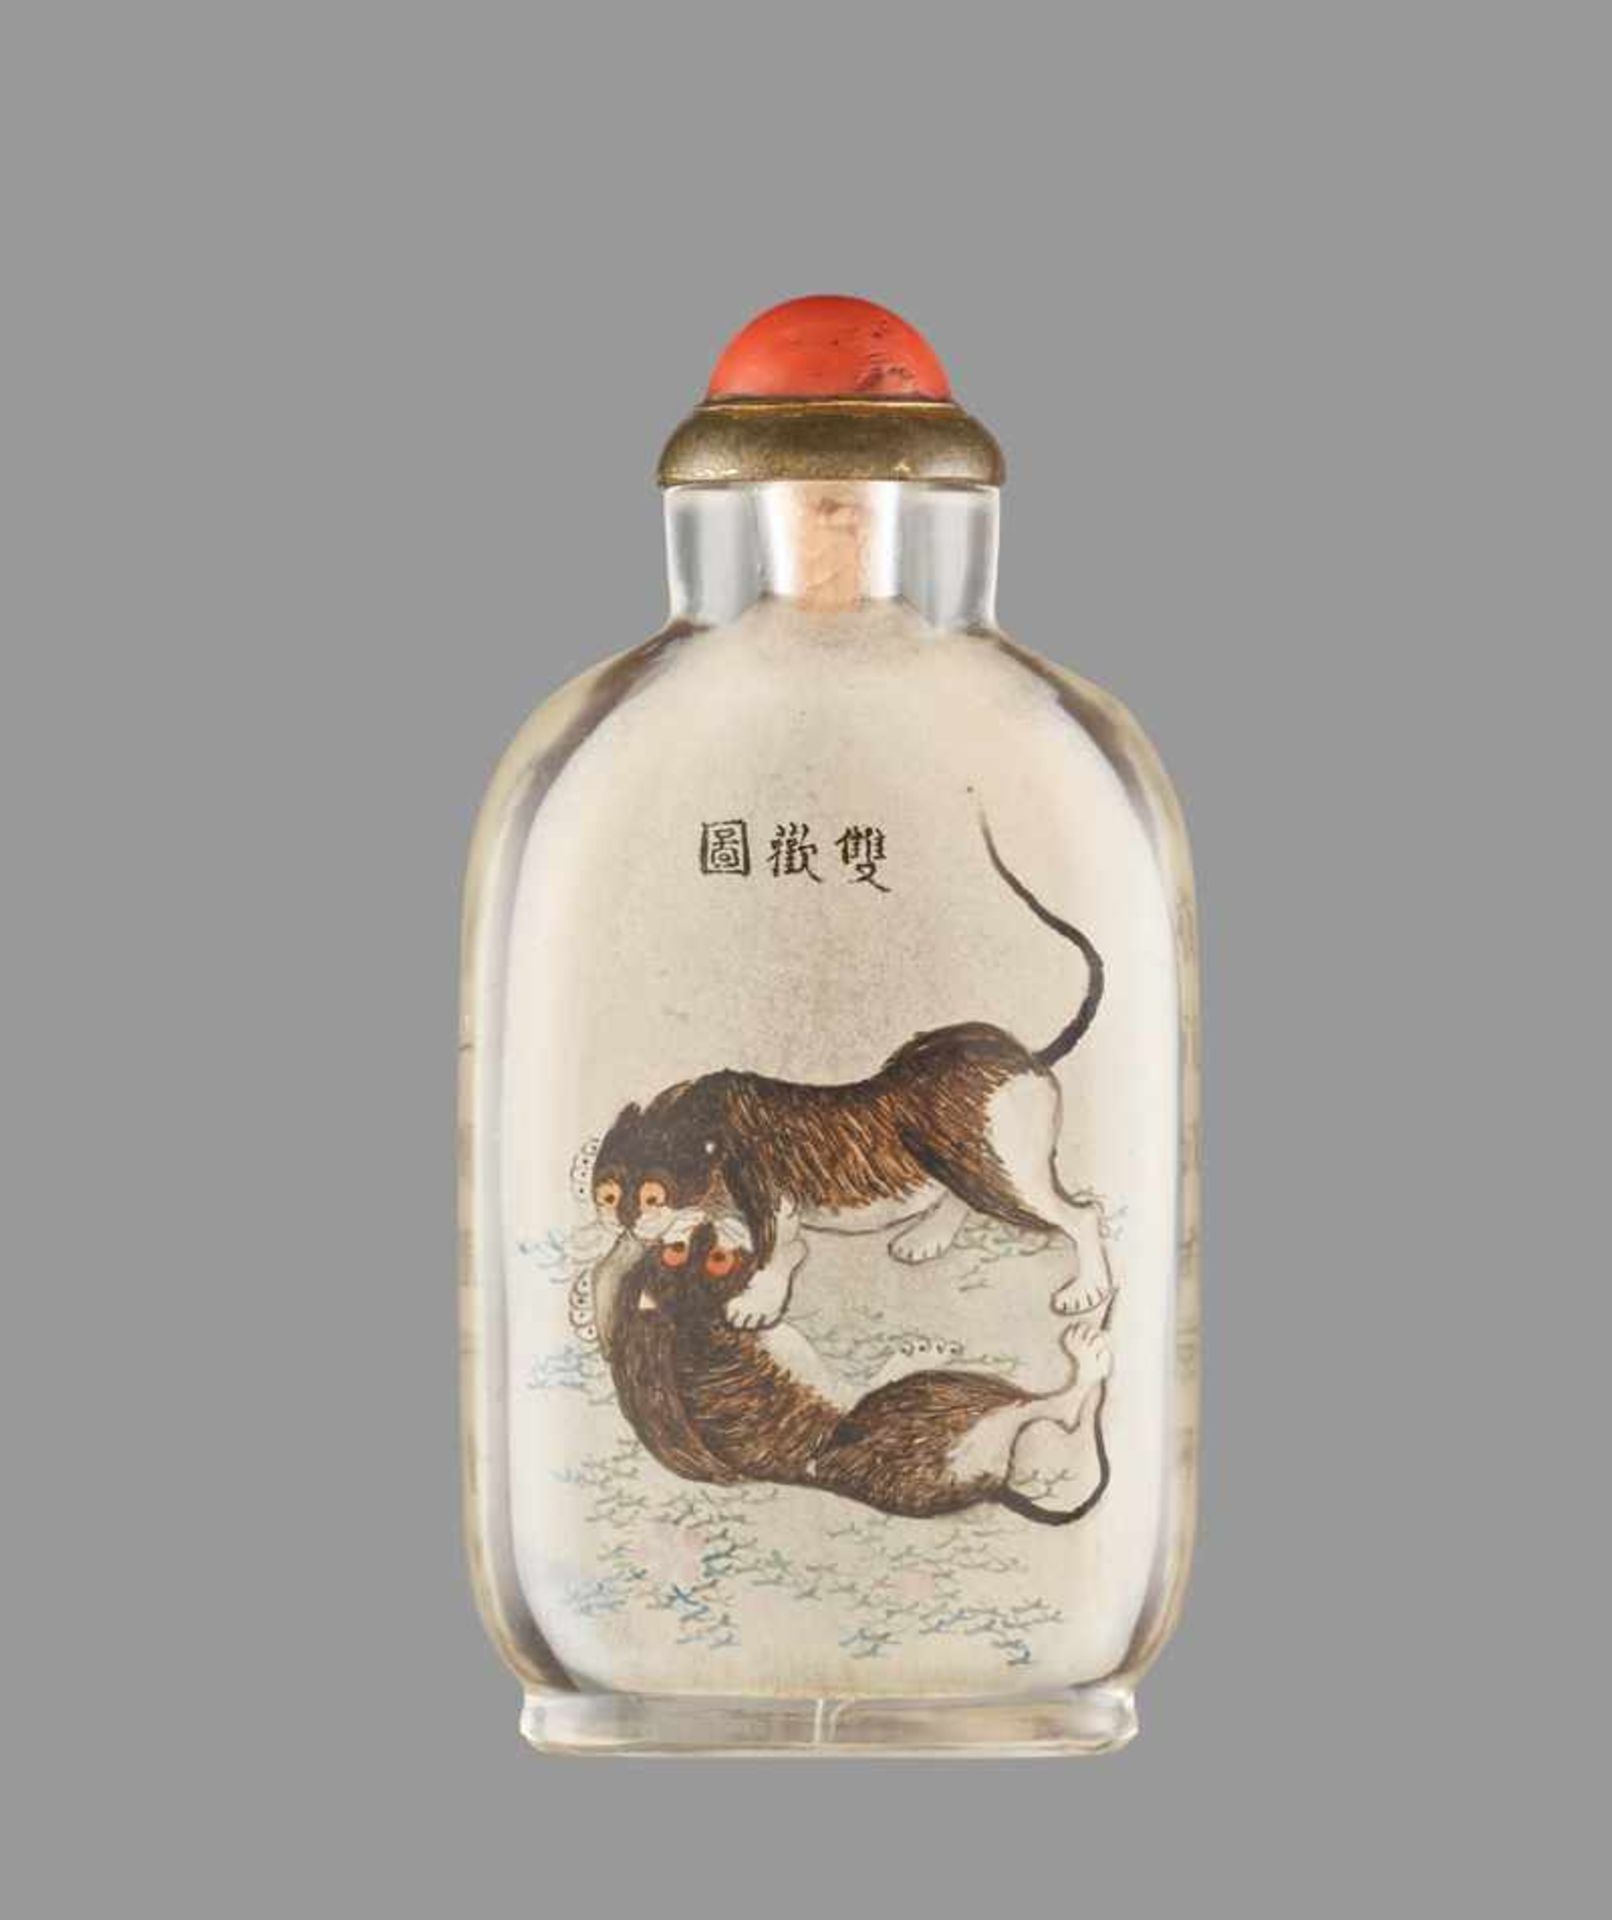 AN INSIDE-PAINTED GLASS ‘PLAYING CATS’ SNUFF BOTTLE, MA SHAOXUAN(the larger companion to the